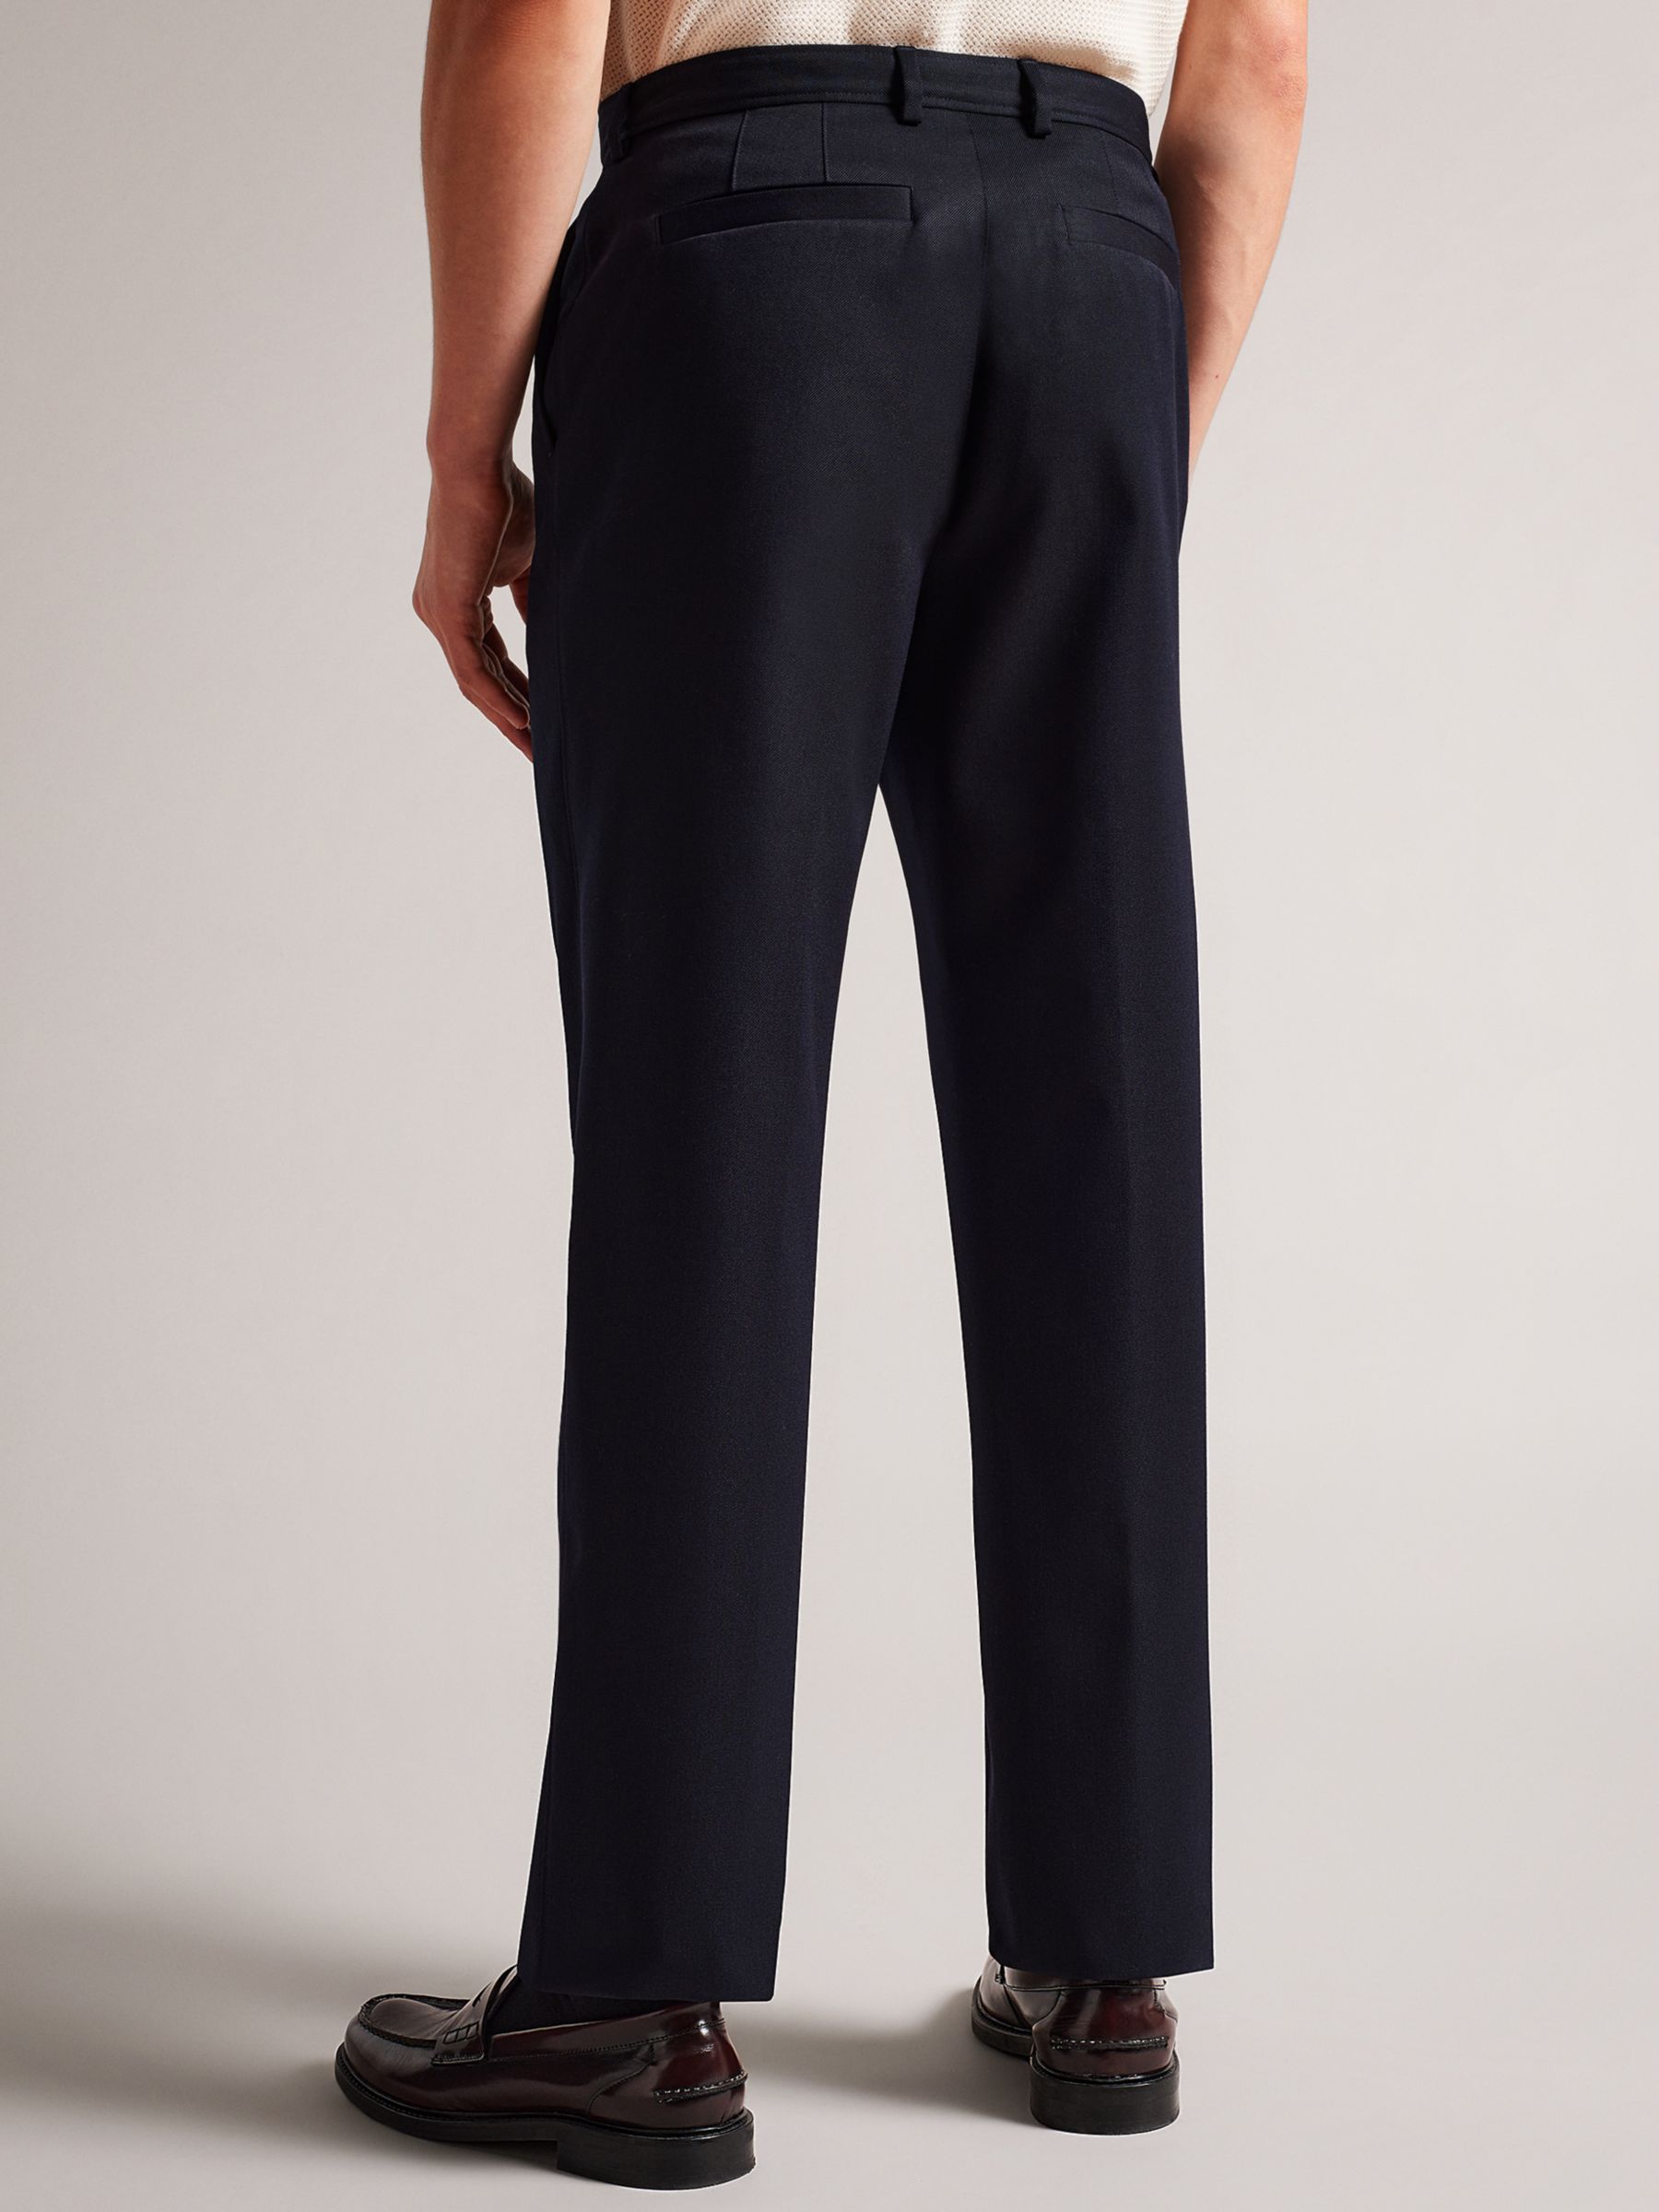 Ted Baker Heddon Tailored Trousers, Navy at John Lewis & Partners